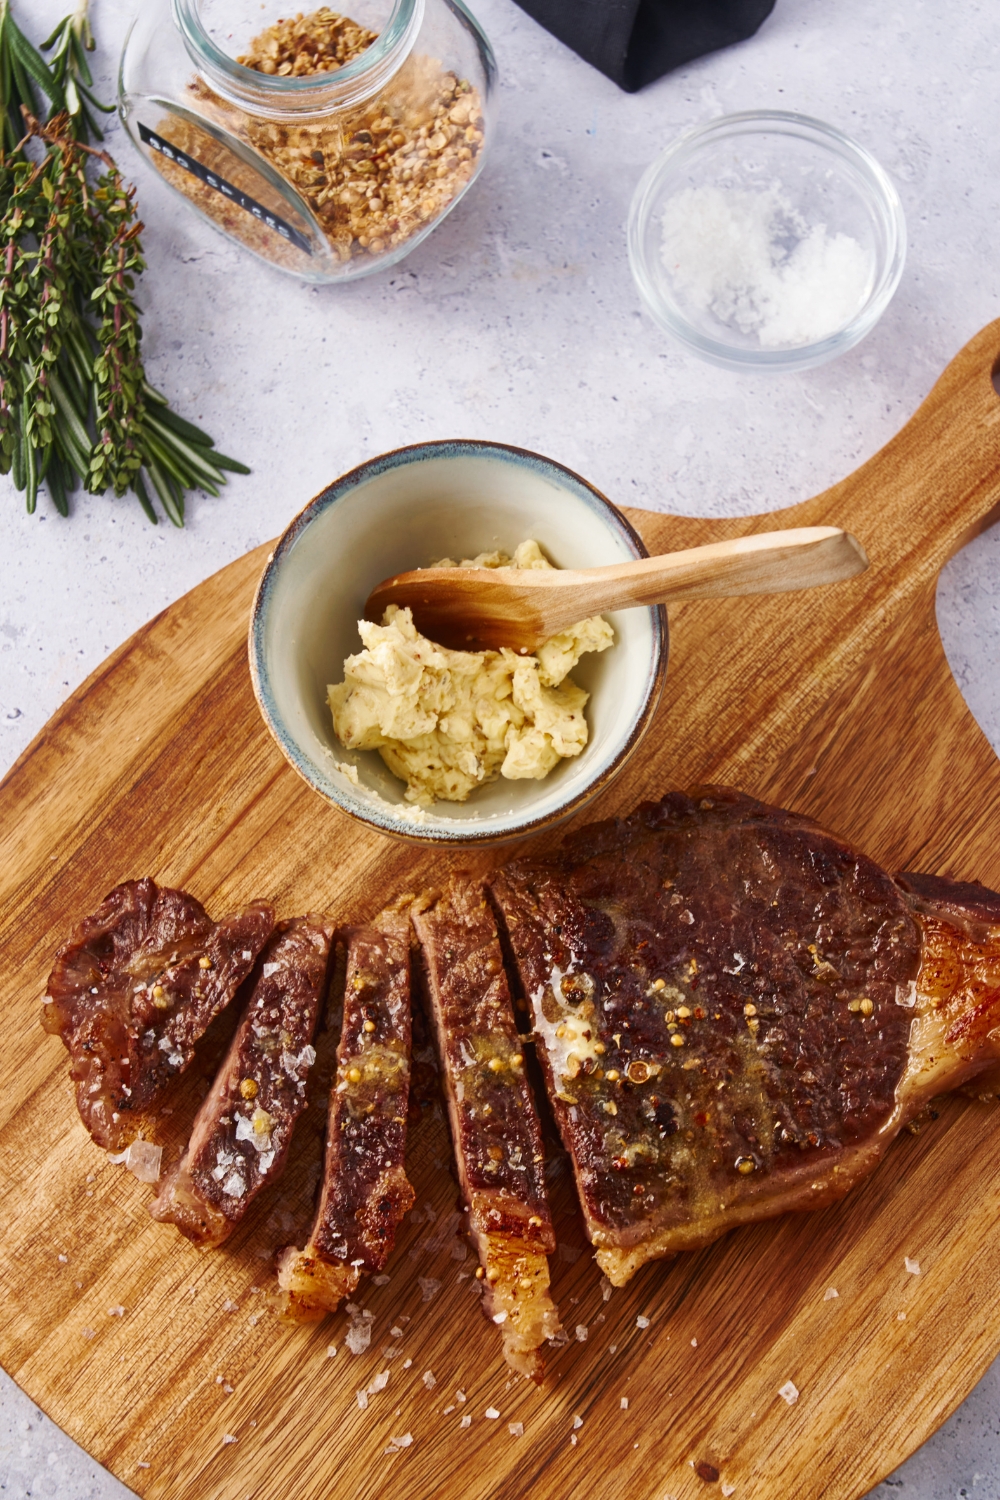 A cooked steak on a wood cutting board. Half of the steak has been sliced into thin slices and there is a bowl of compound butter on the board with a wood spoon in the bowl.